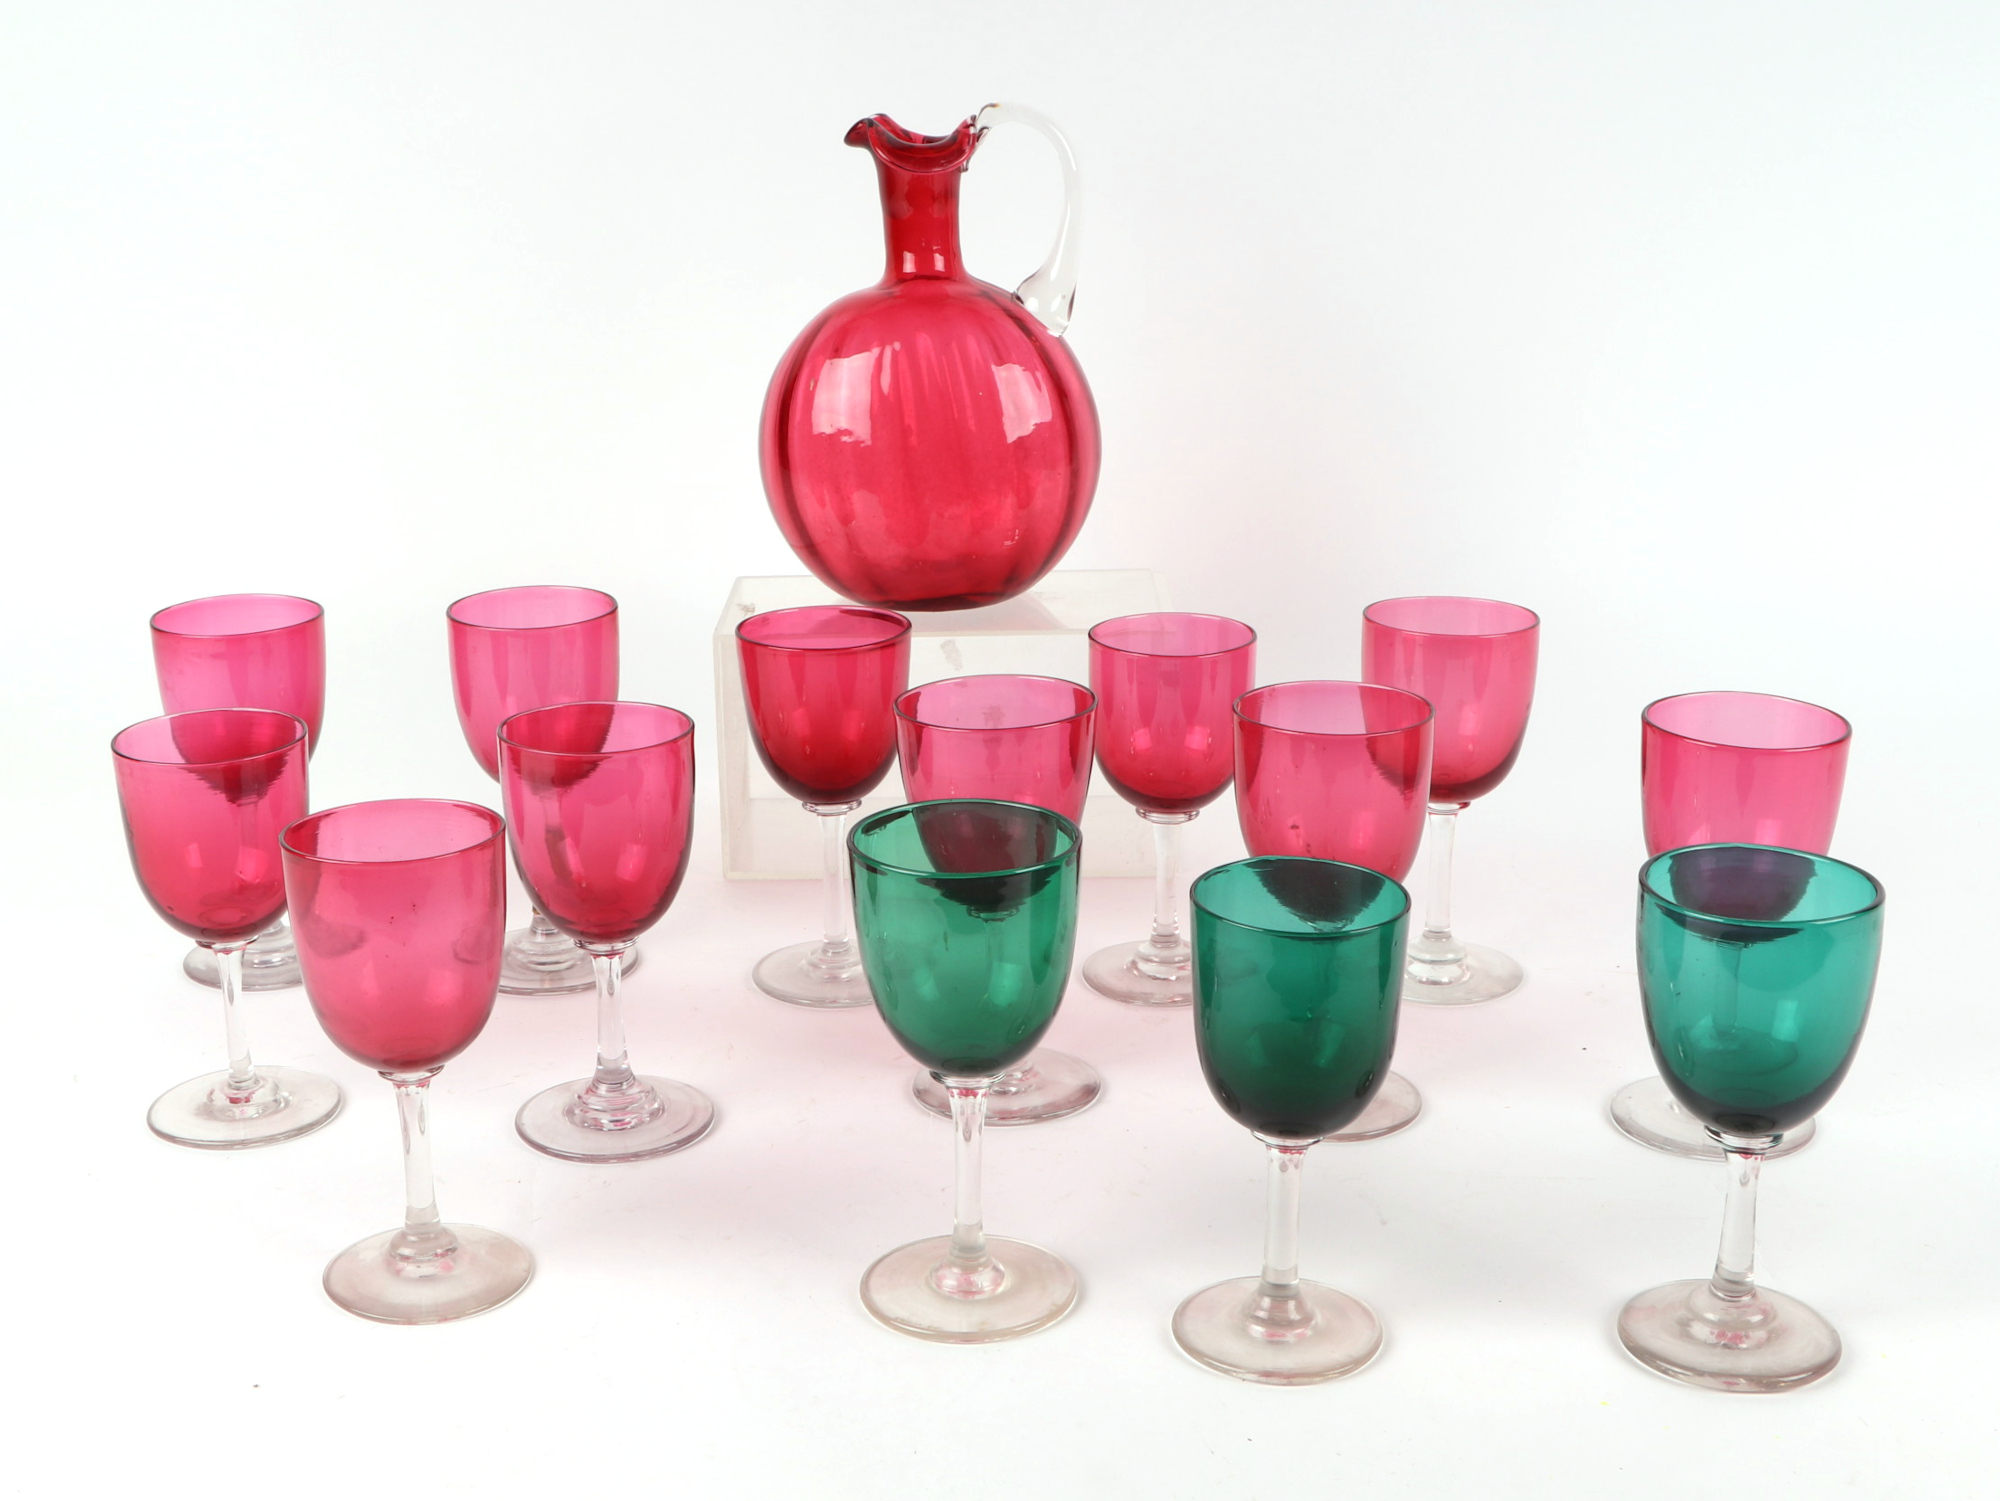 A set of 12 cranberry glass wine glasses, with matching carafe, a celery vase, a pair of spiral